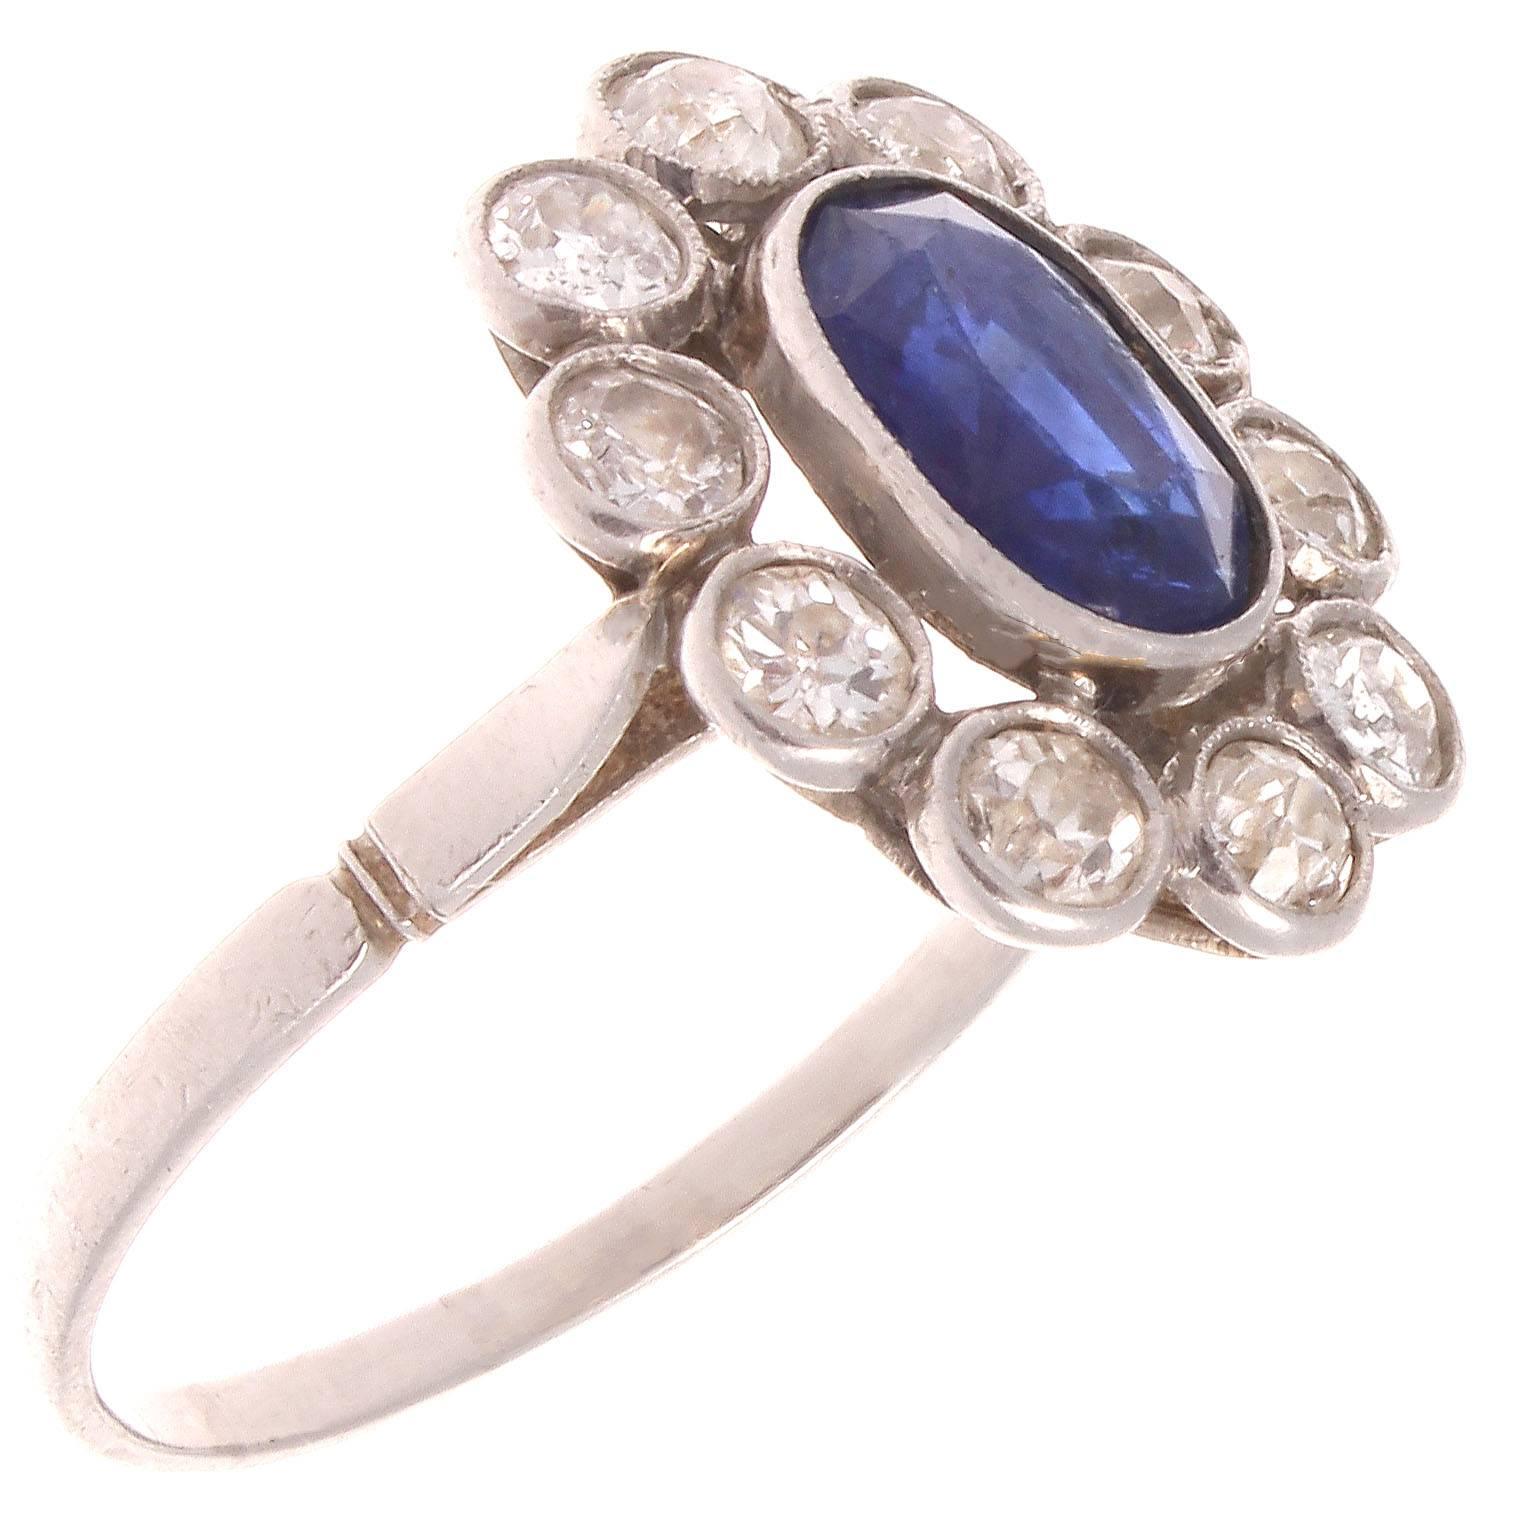 A very pleasing blue emanates from the natural sapphire weighing approximately 2 carats. The blue is perfectly complimented and highlighted by the halo of 10 white diamonds weighing approximately 1.50 carats. The hand crafted ring is in 18k white